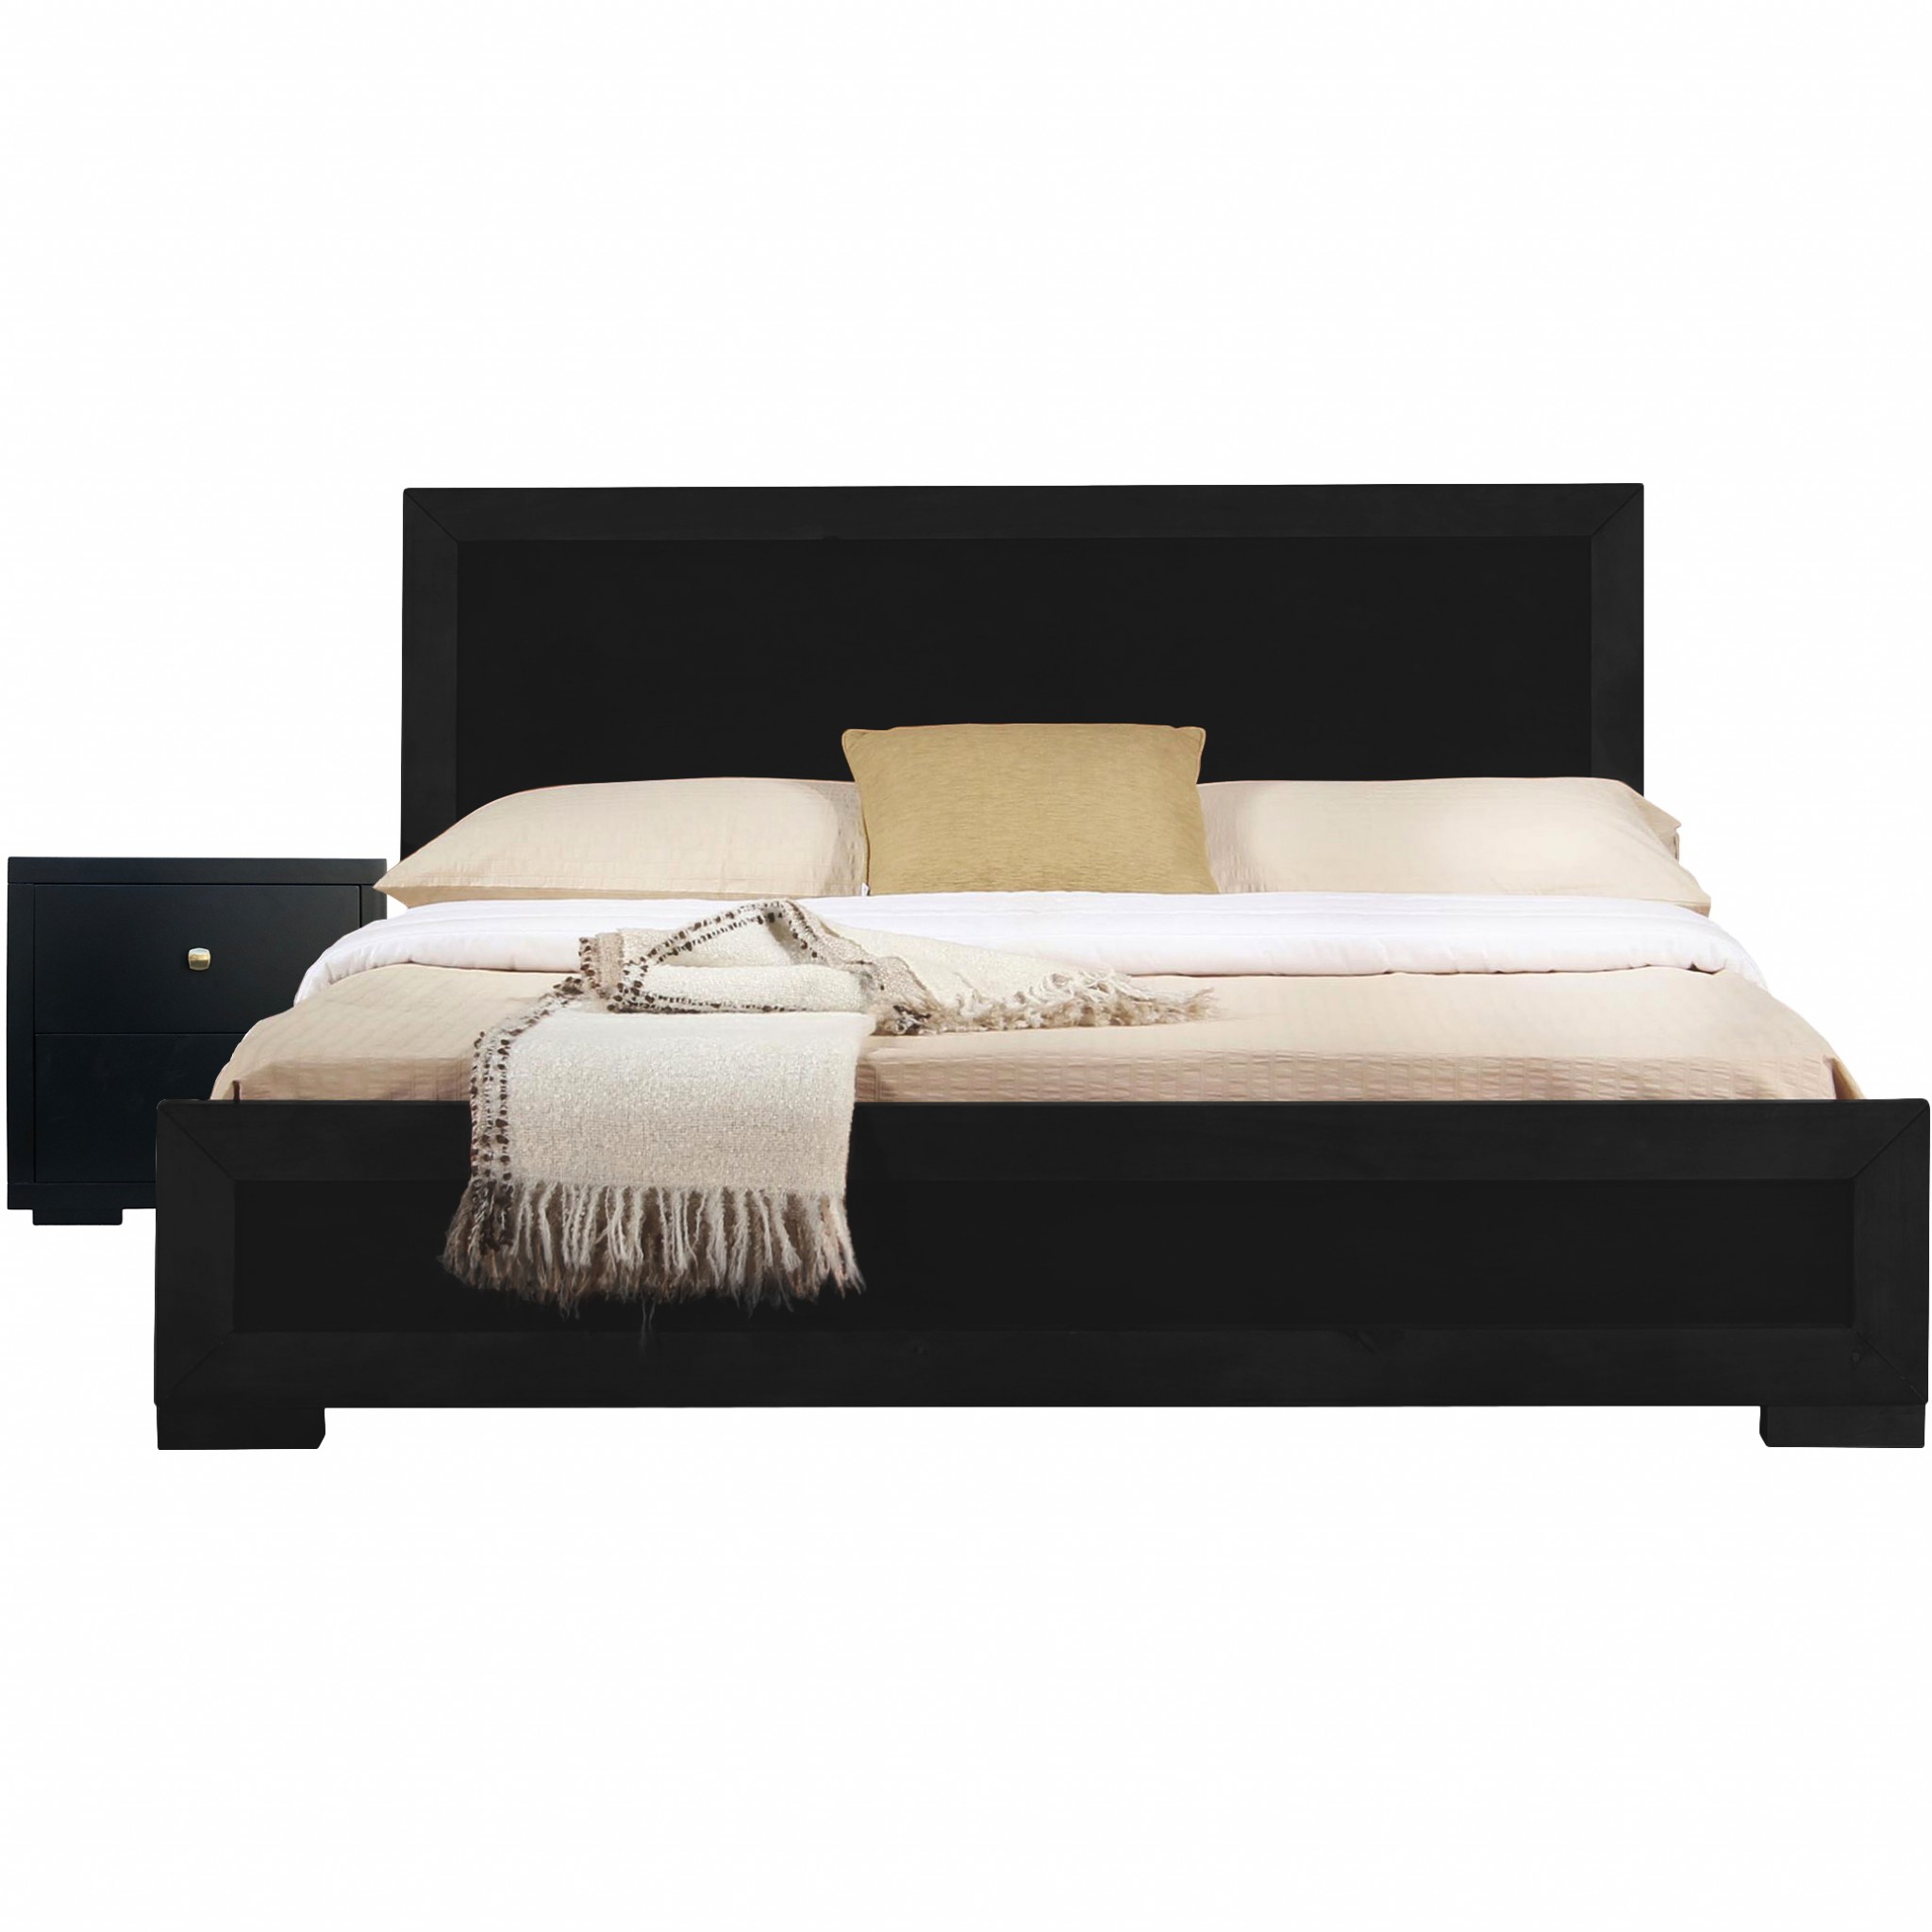 Moma Black Wood Platform Full Bed With Nightstand-468267-1